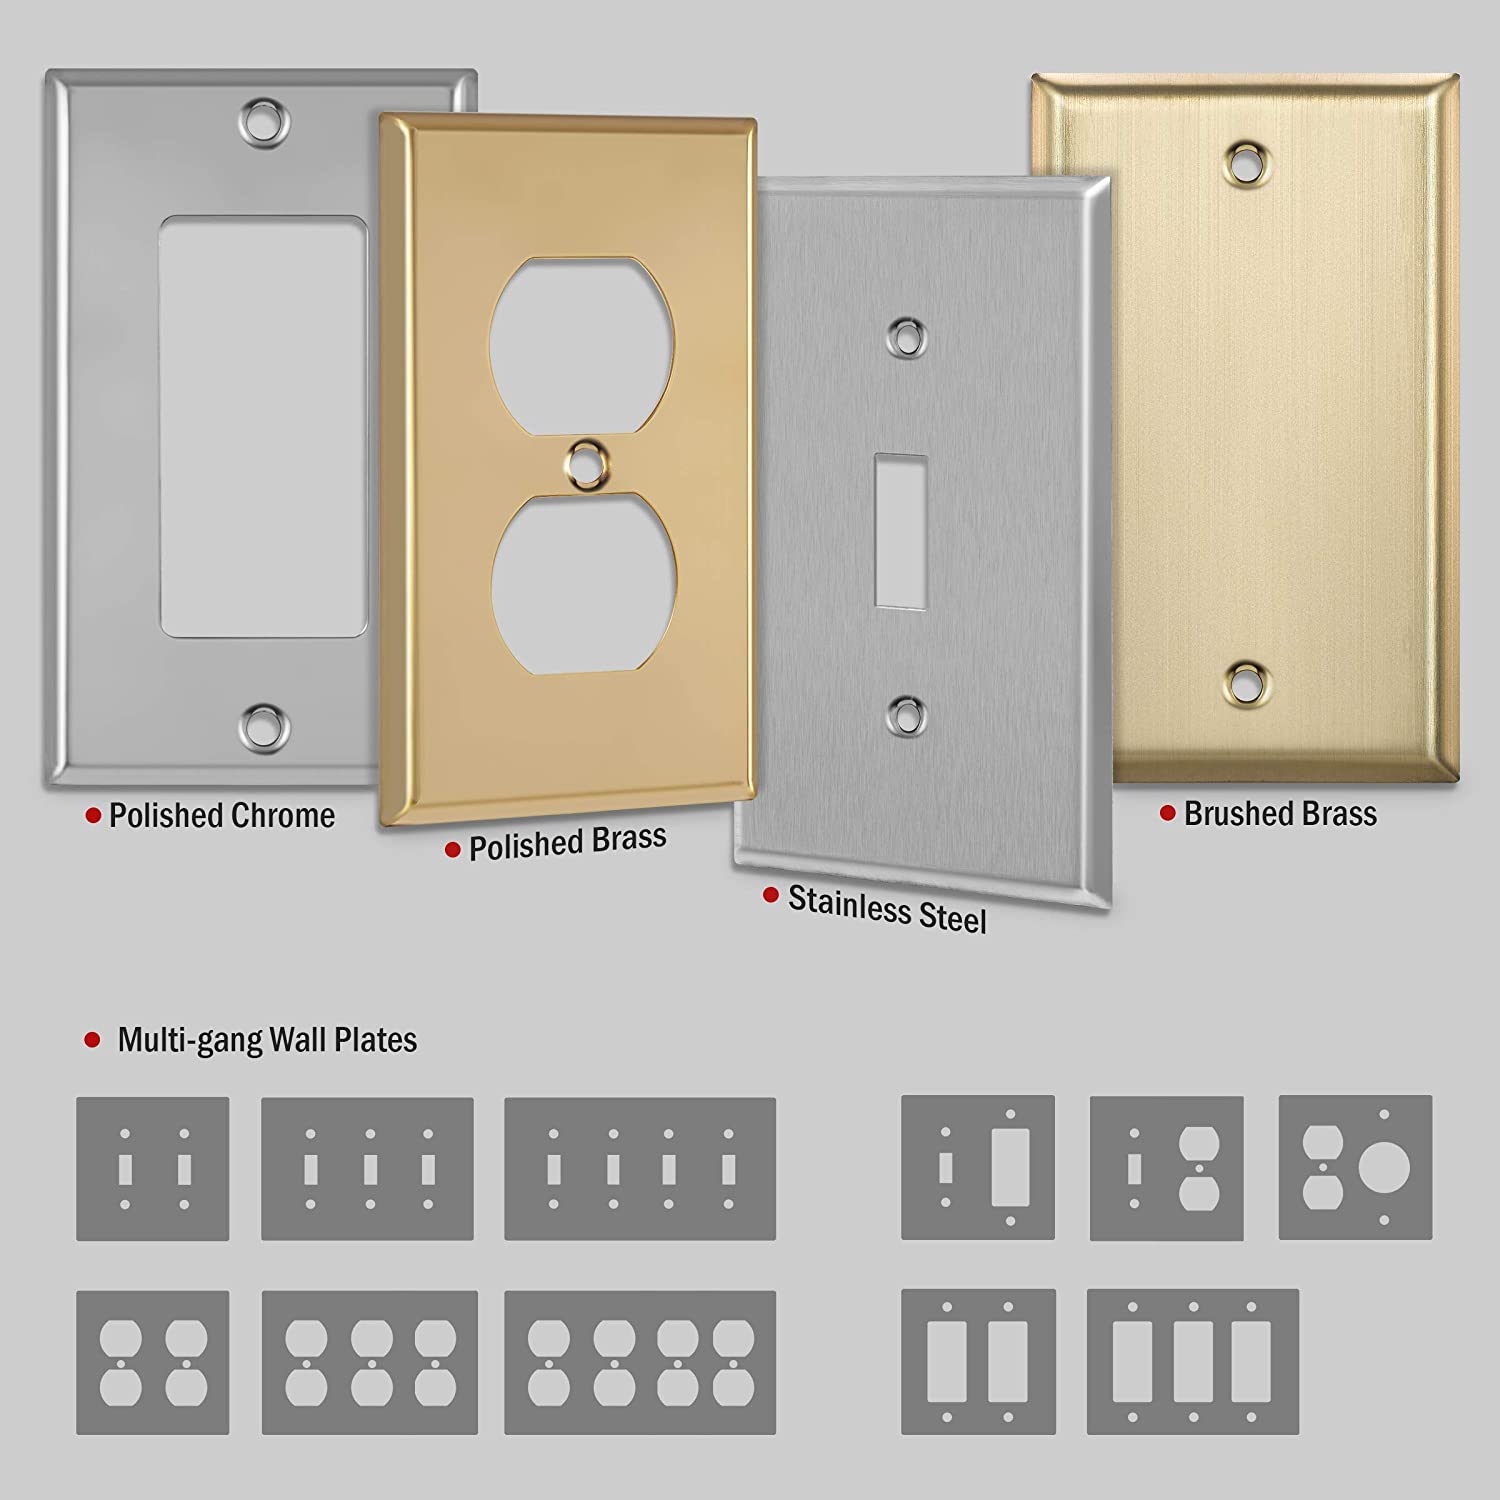 2-Gang Metal Toggle Switch/Decorator Outlet Combination Wall Plate Polished Chrome